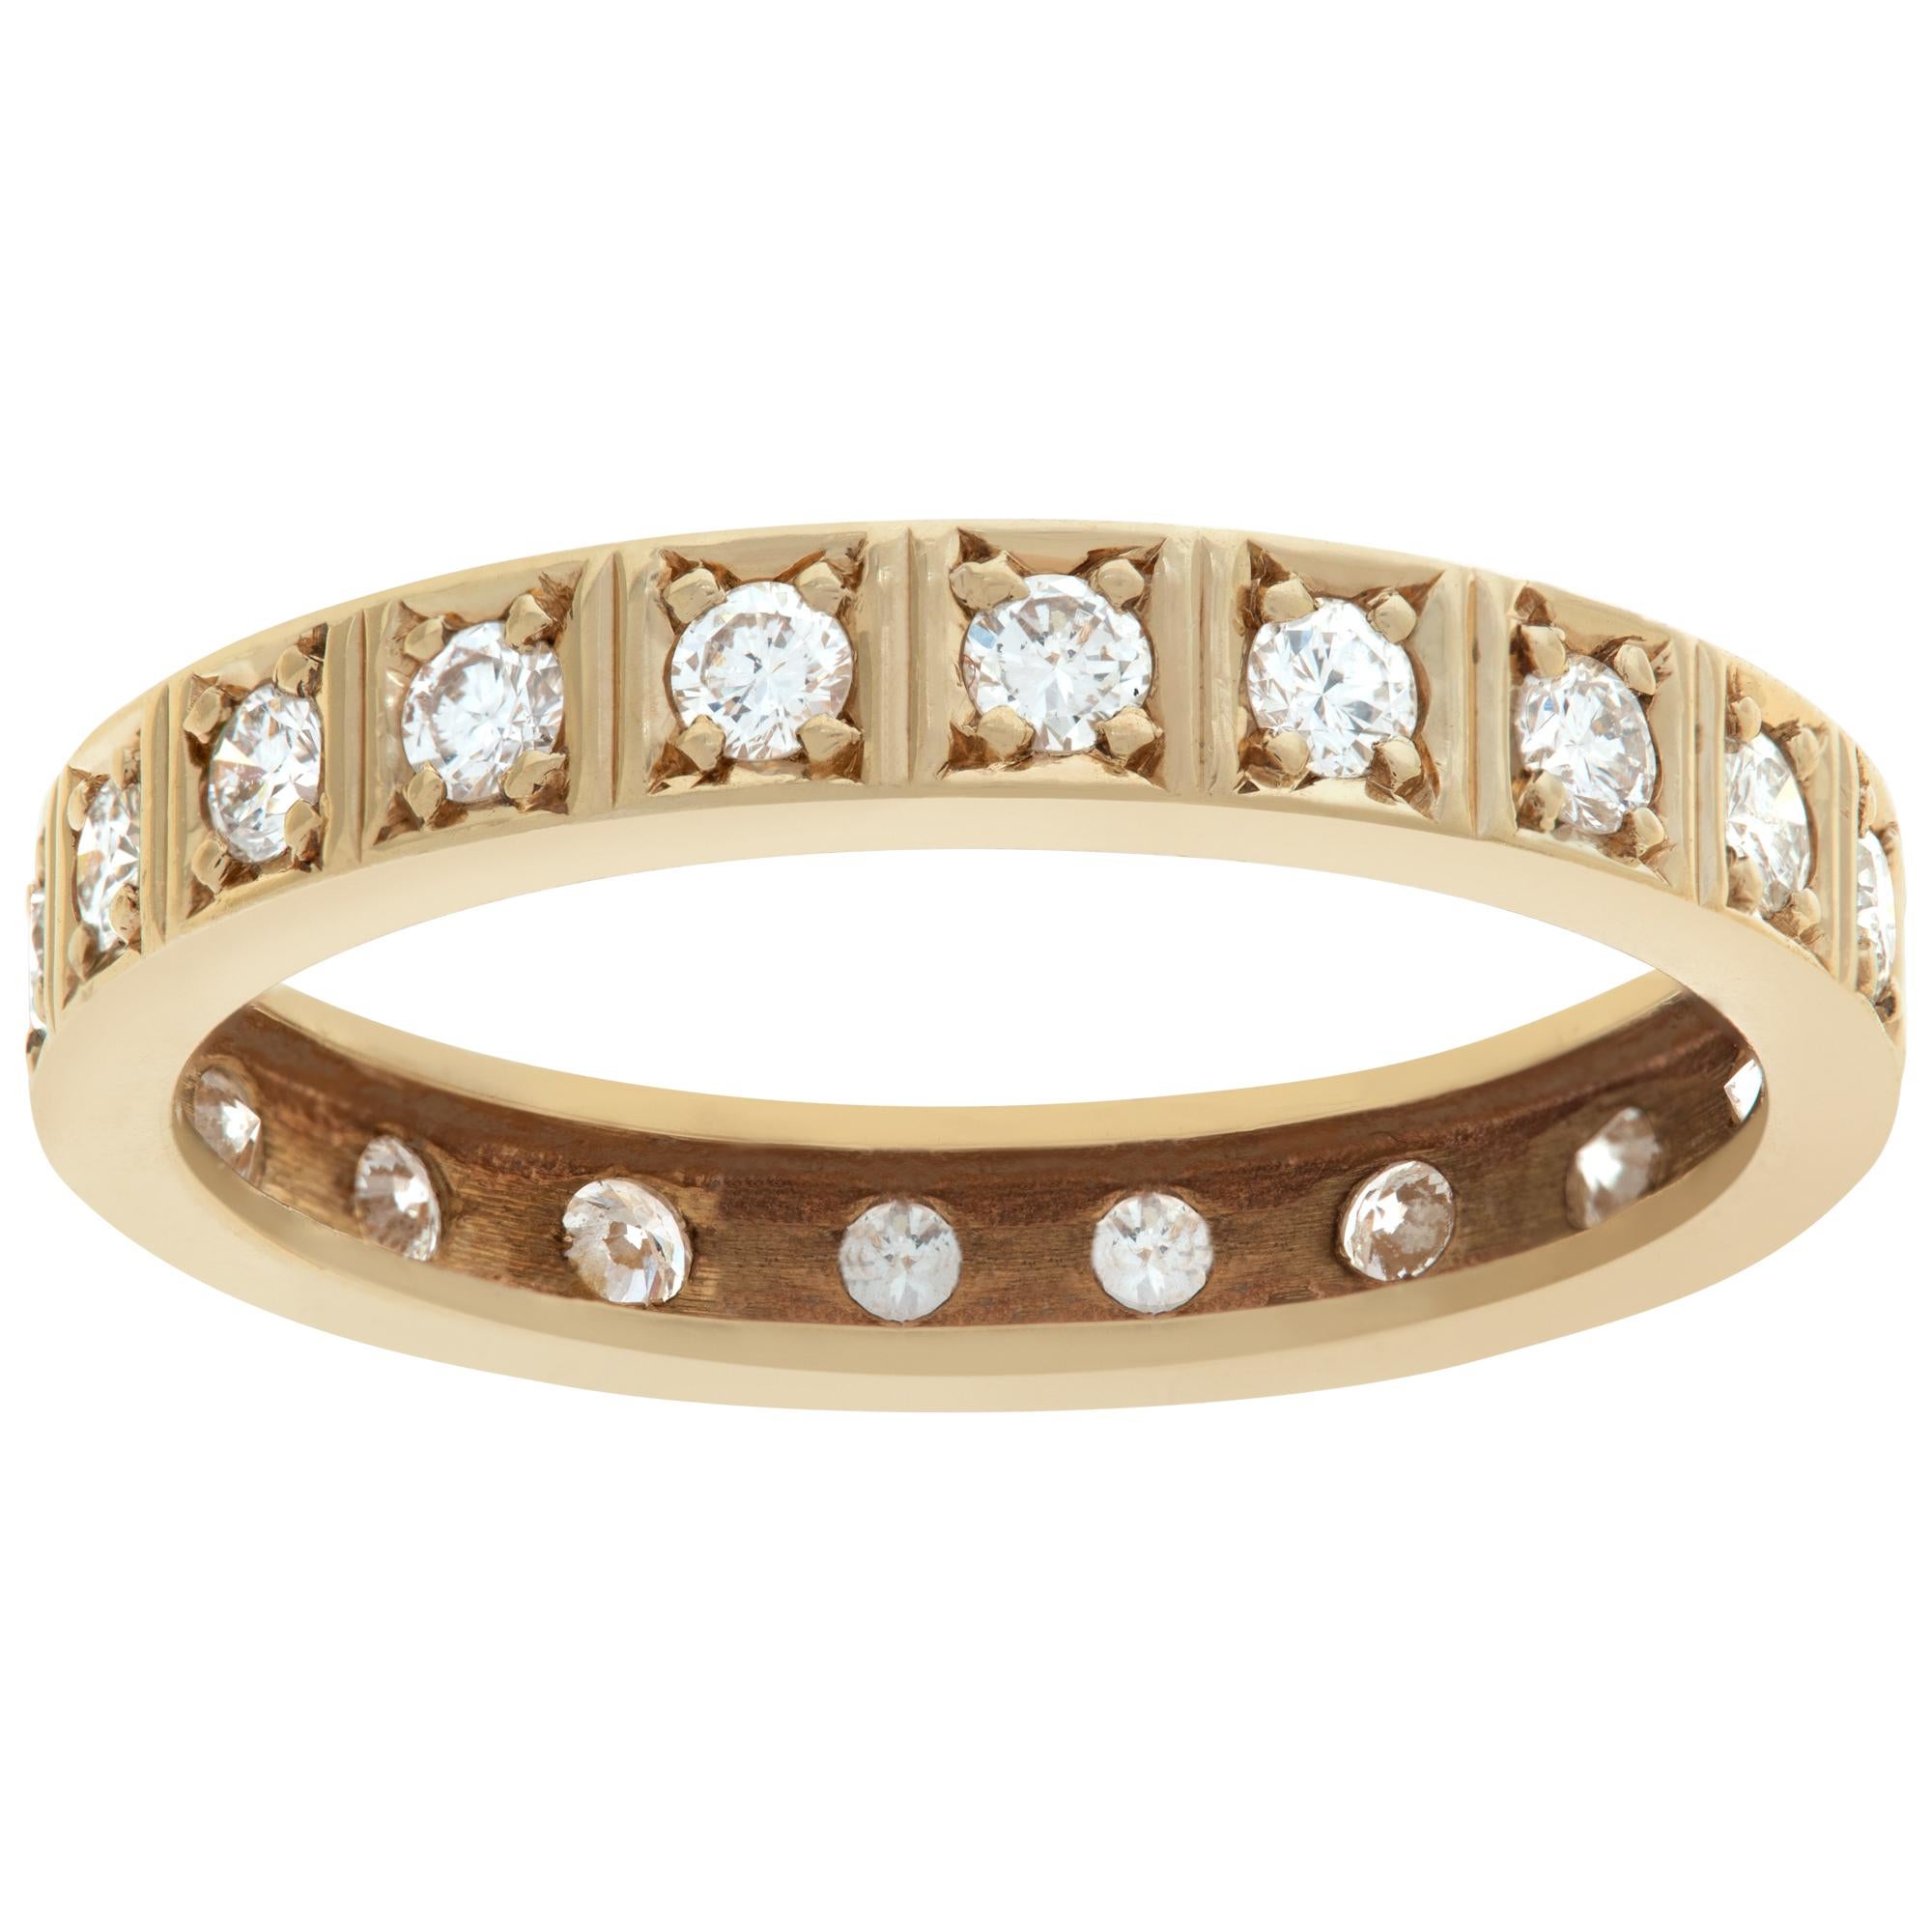 Yellow gold eternity band with diamonds